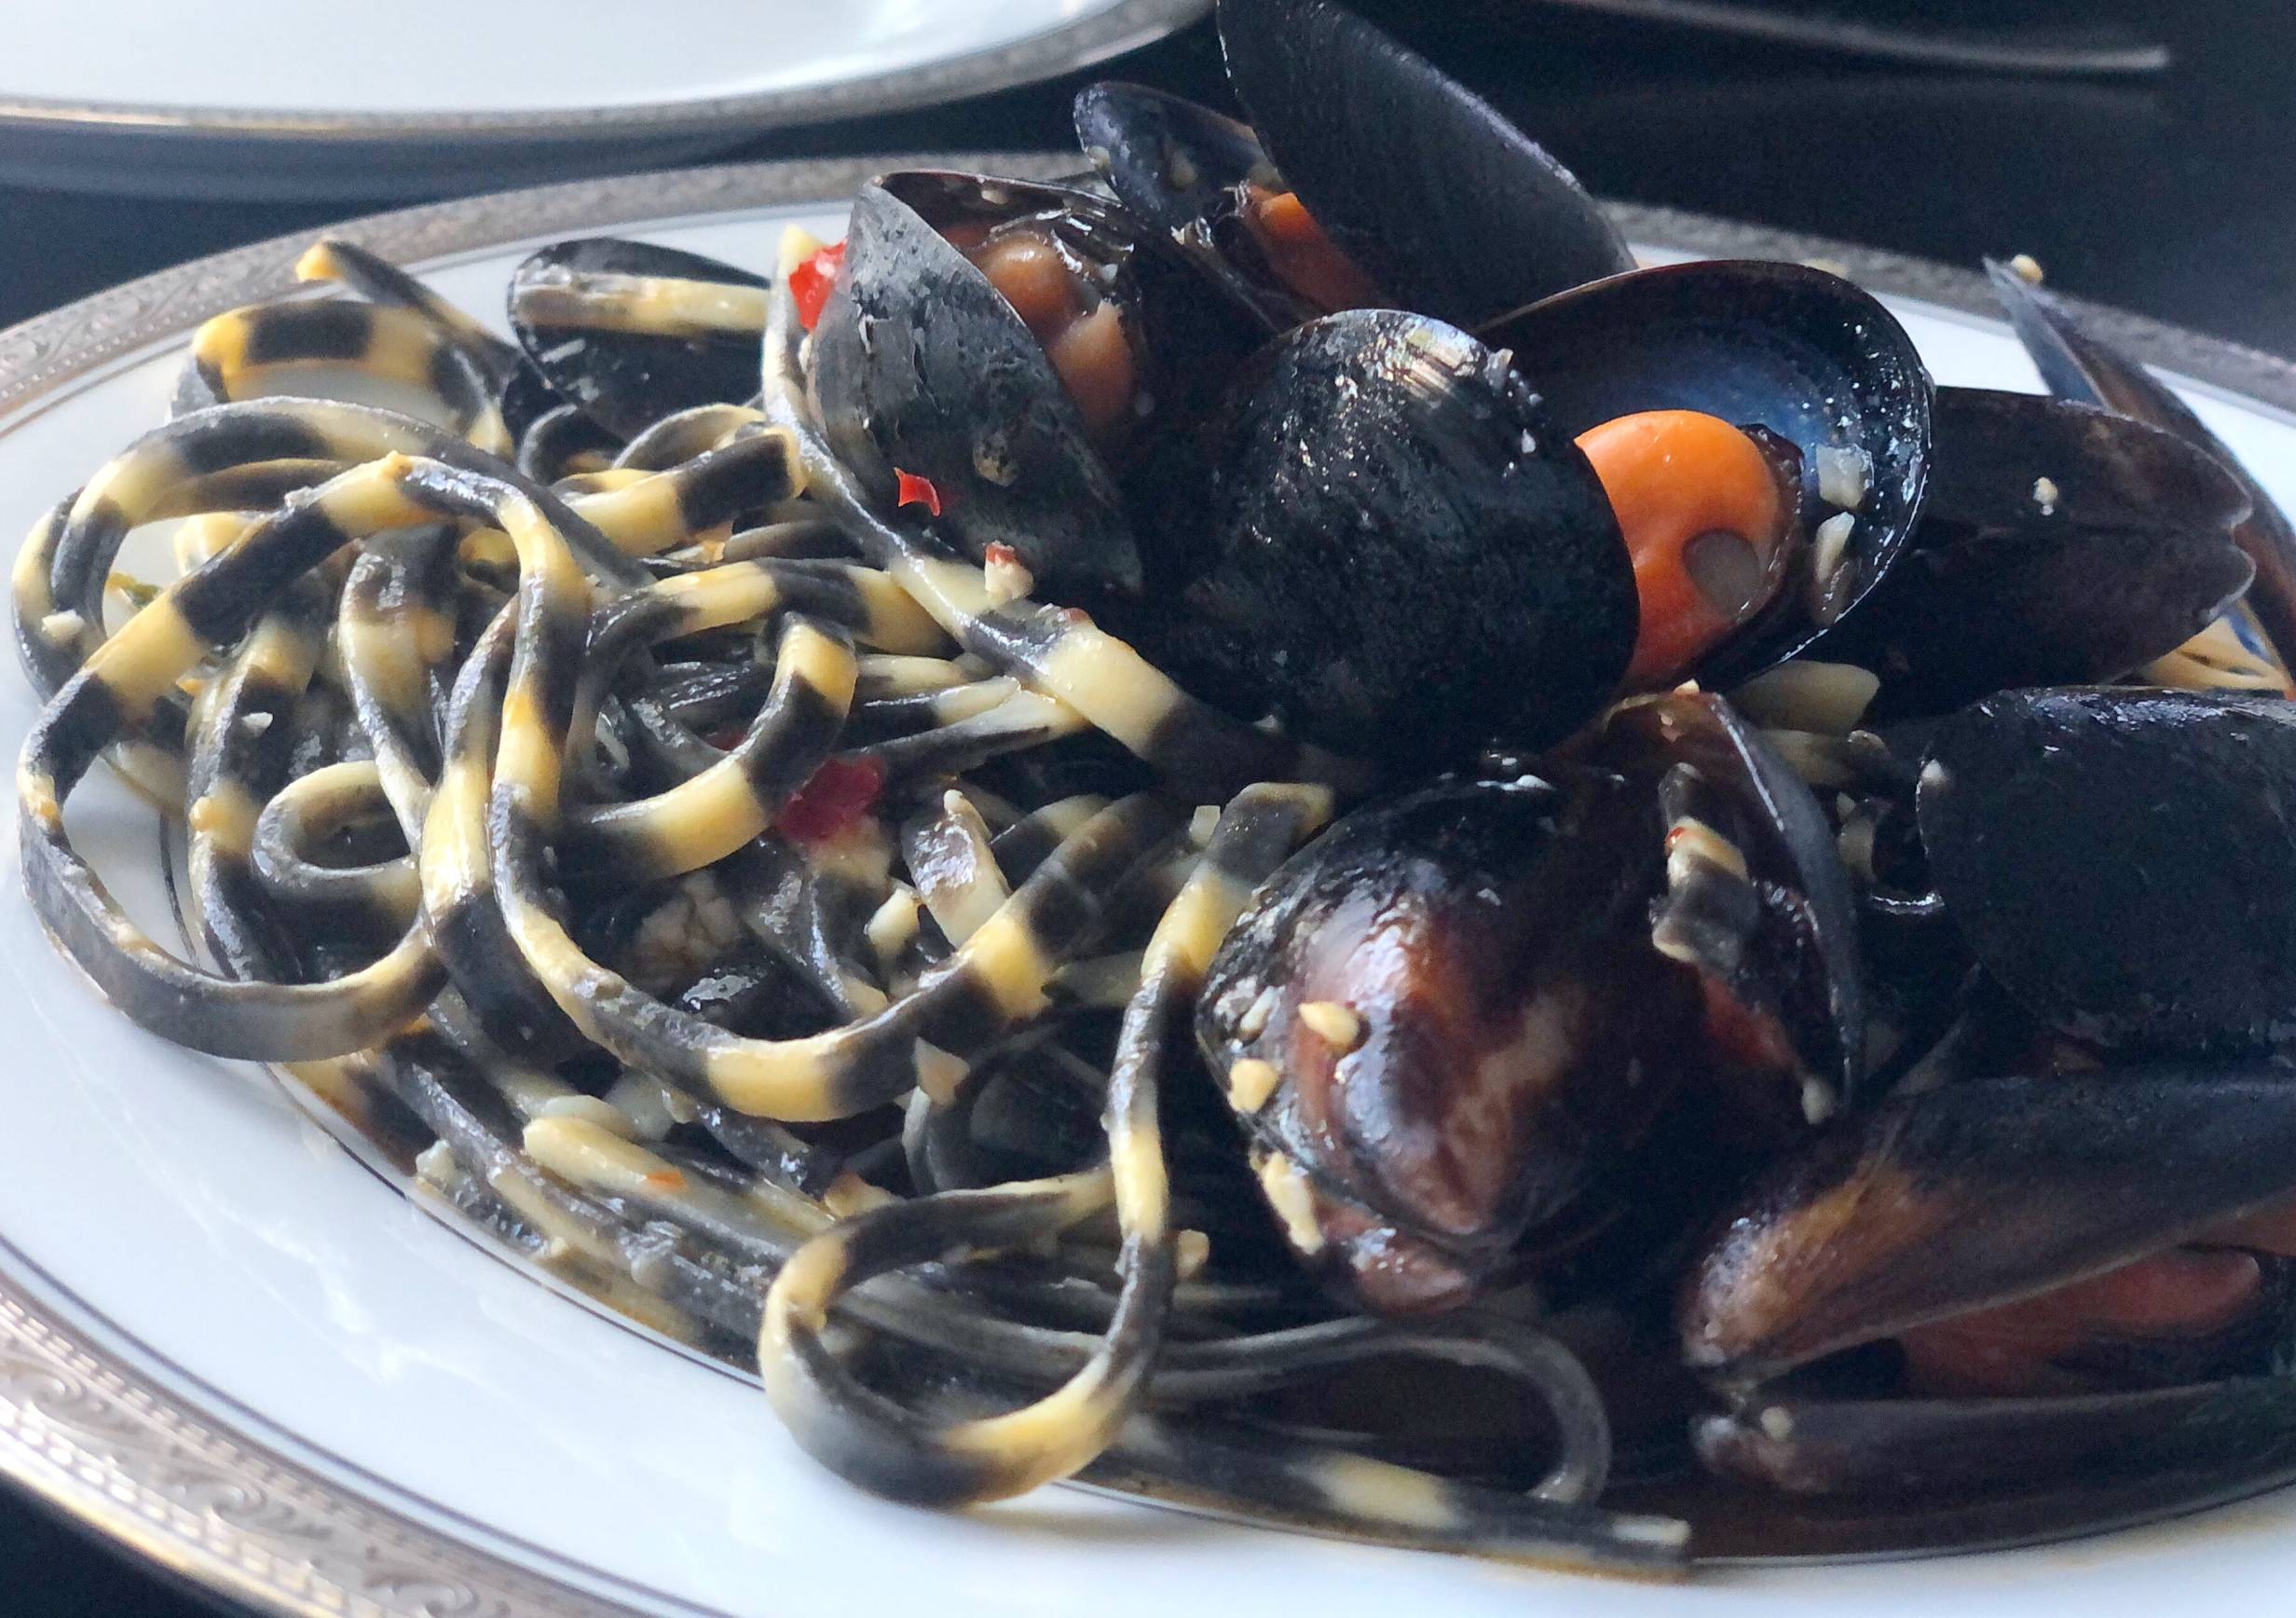 Check out NAYA’s squid ink pasta with mussels